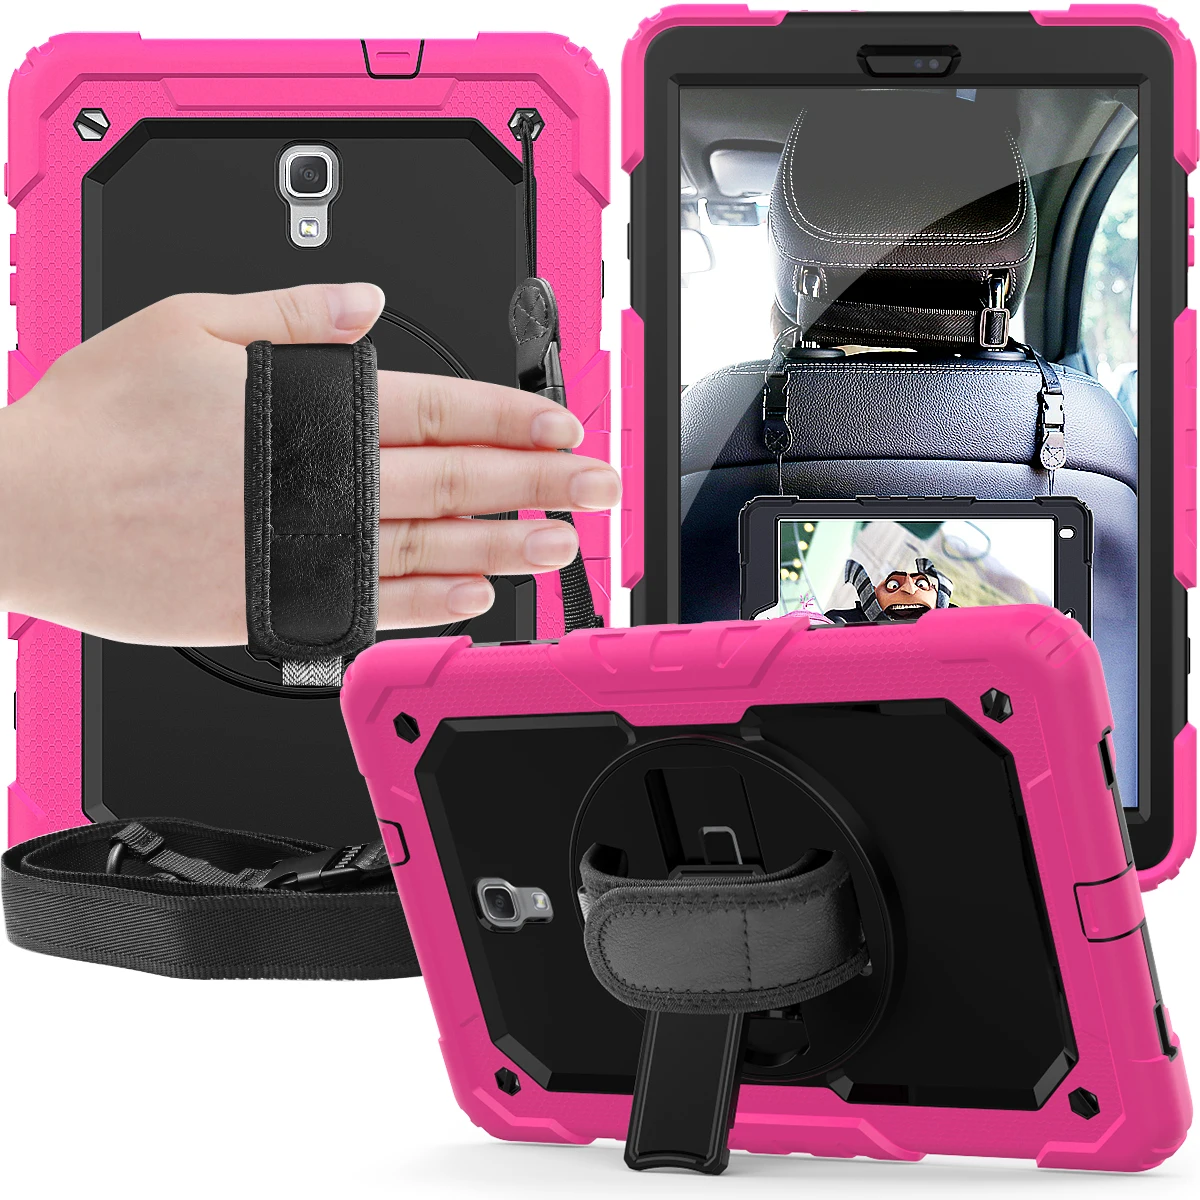 

360 Rotating Hand Strap/Kickstand Cover Case For Samsung Galaxy Tab A 10.5 T590 SM-T595 T597 SM-T590 Tablet Shoulder Strap #R